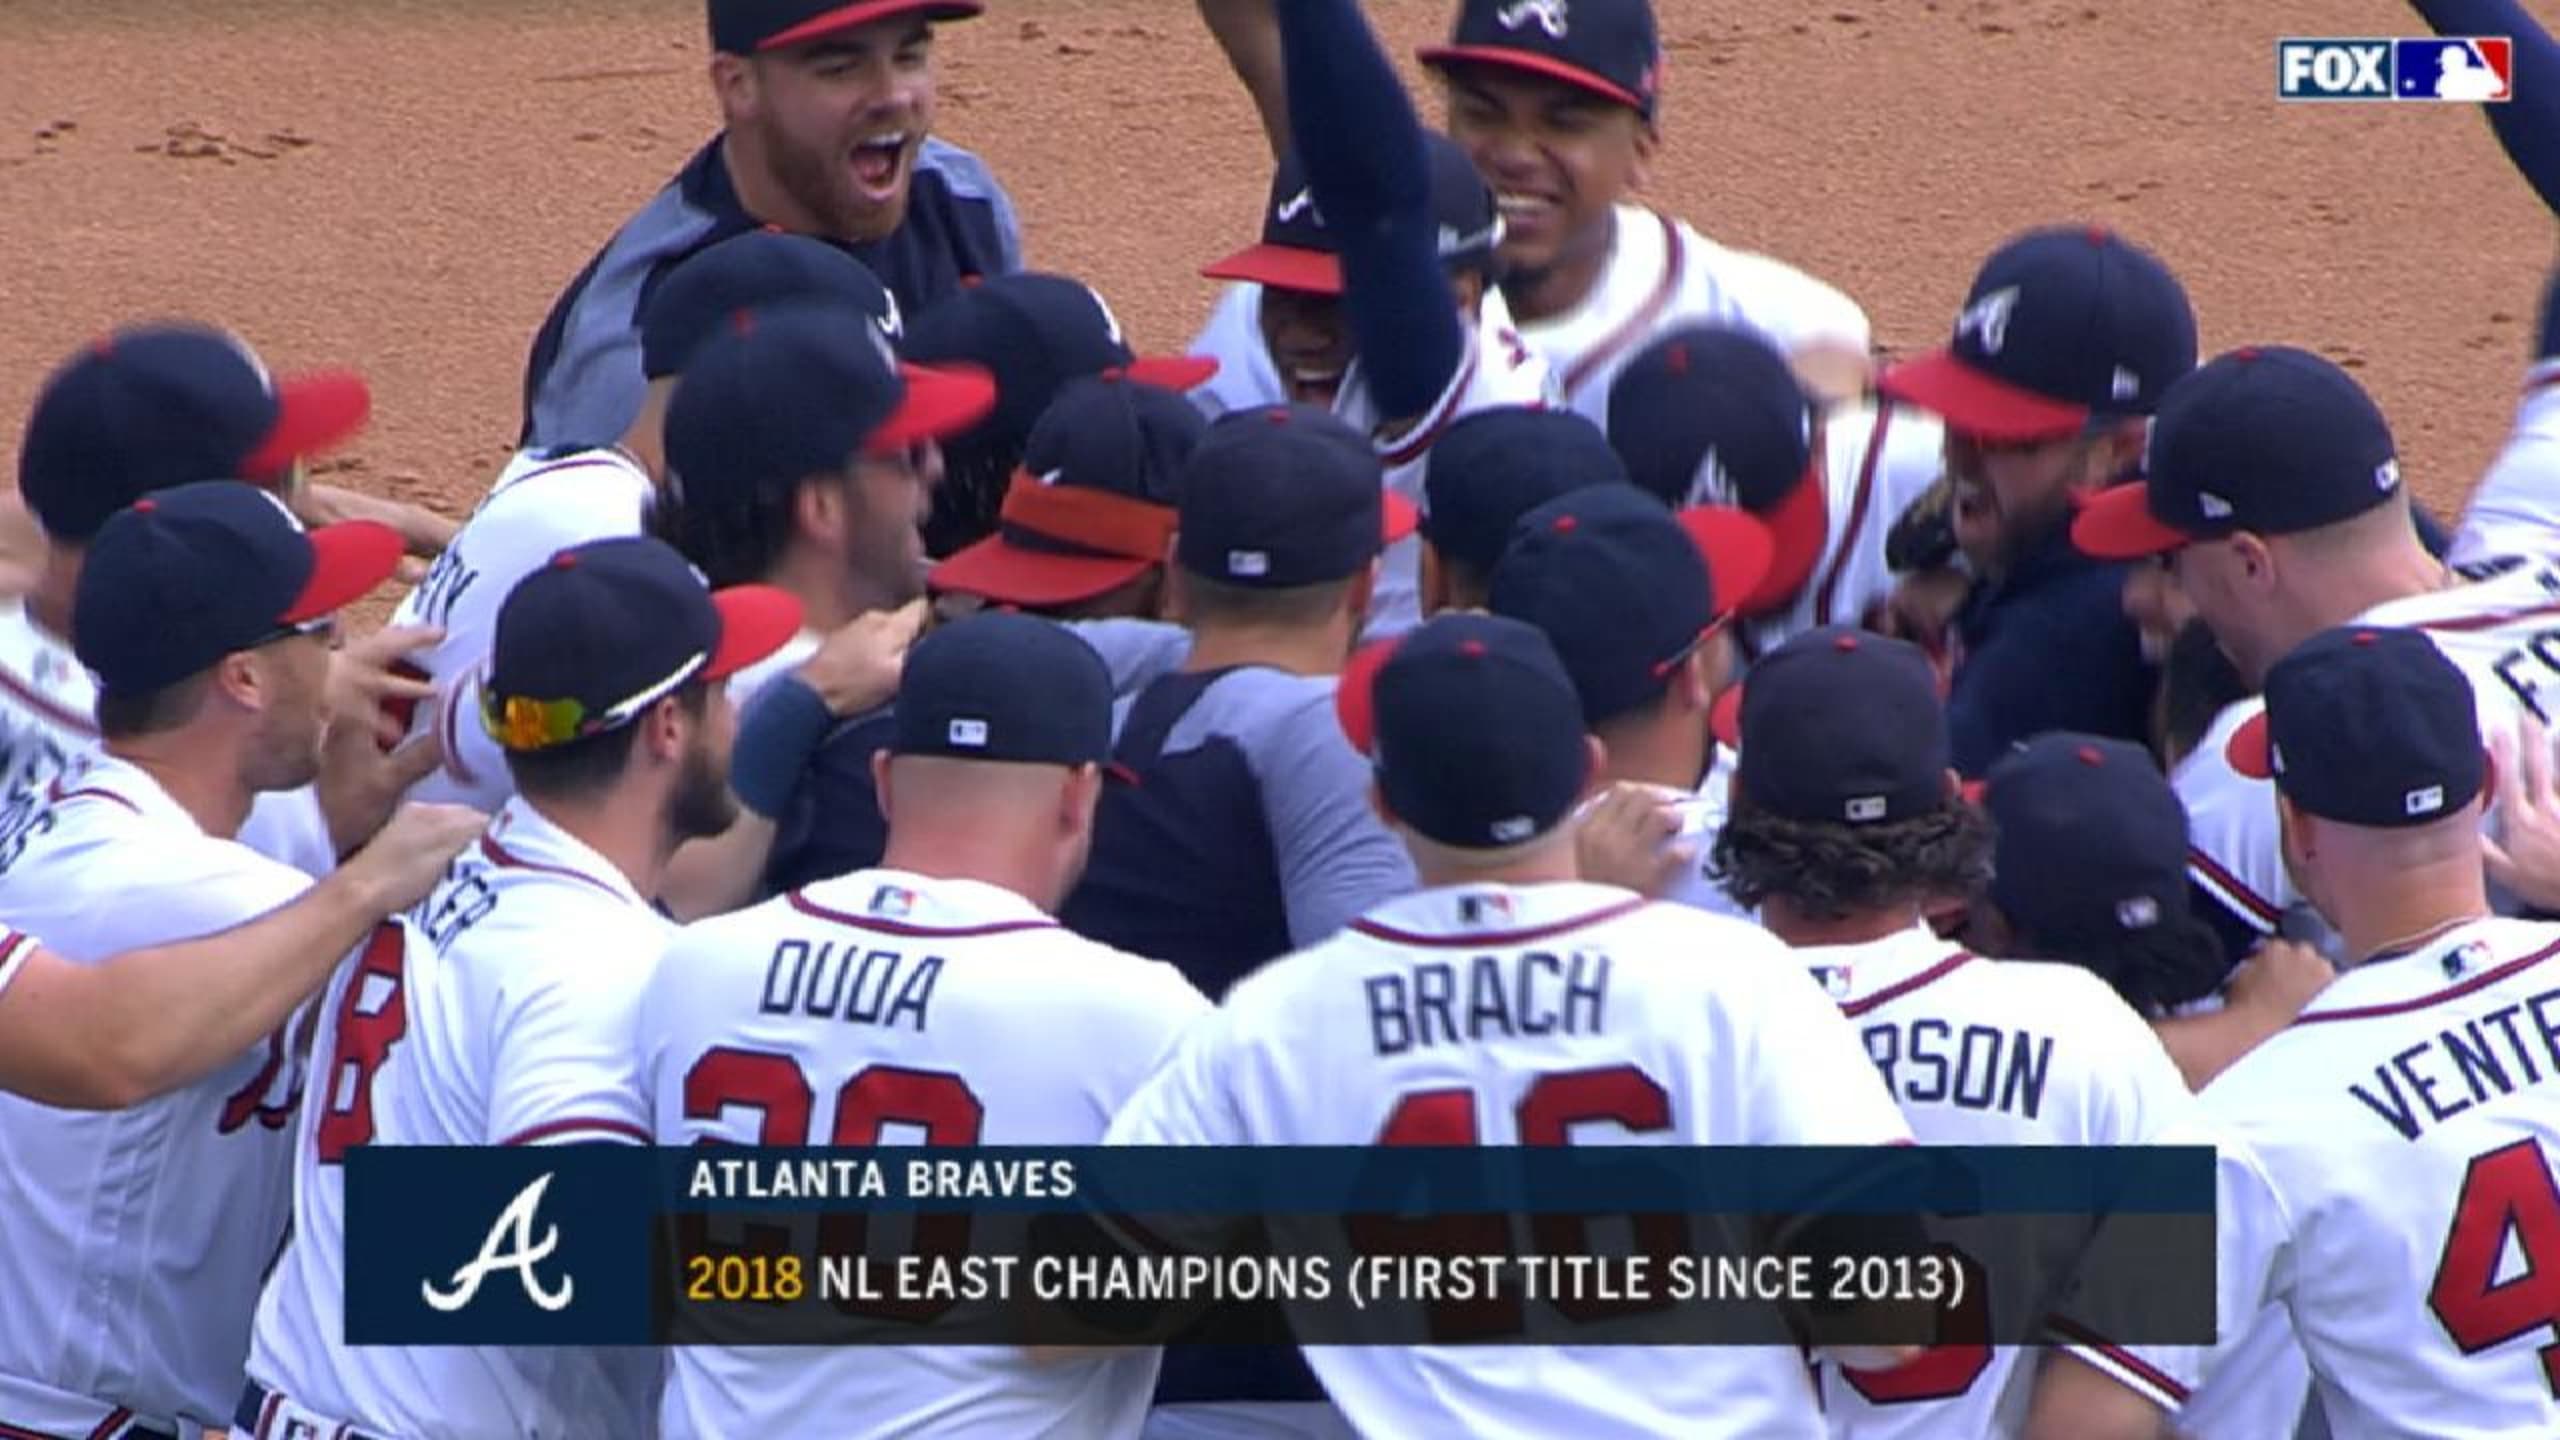 Braves clinch the NL East